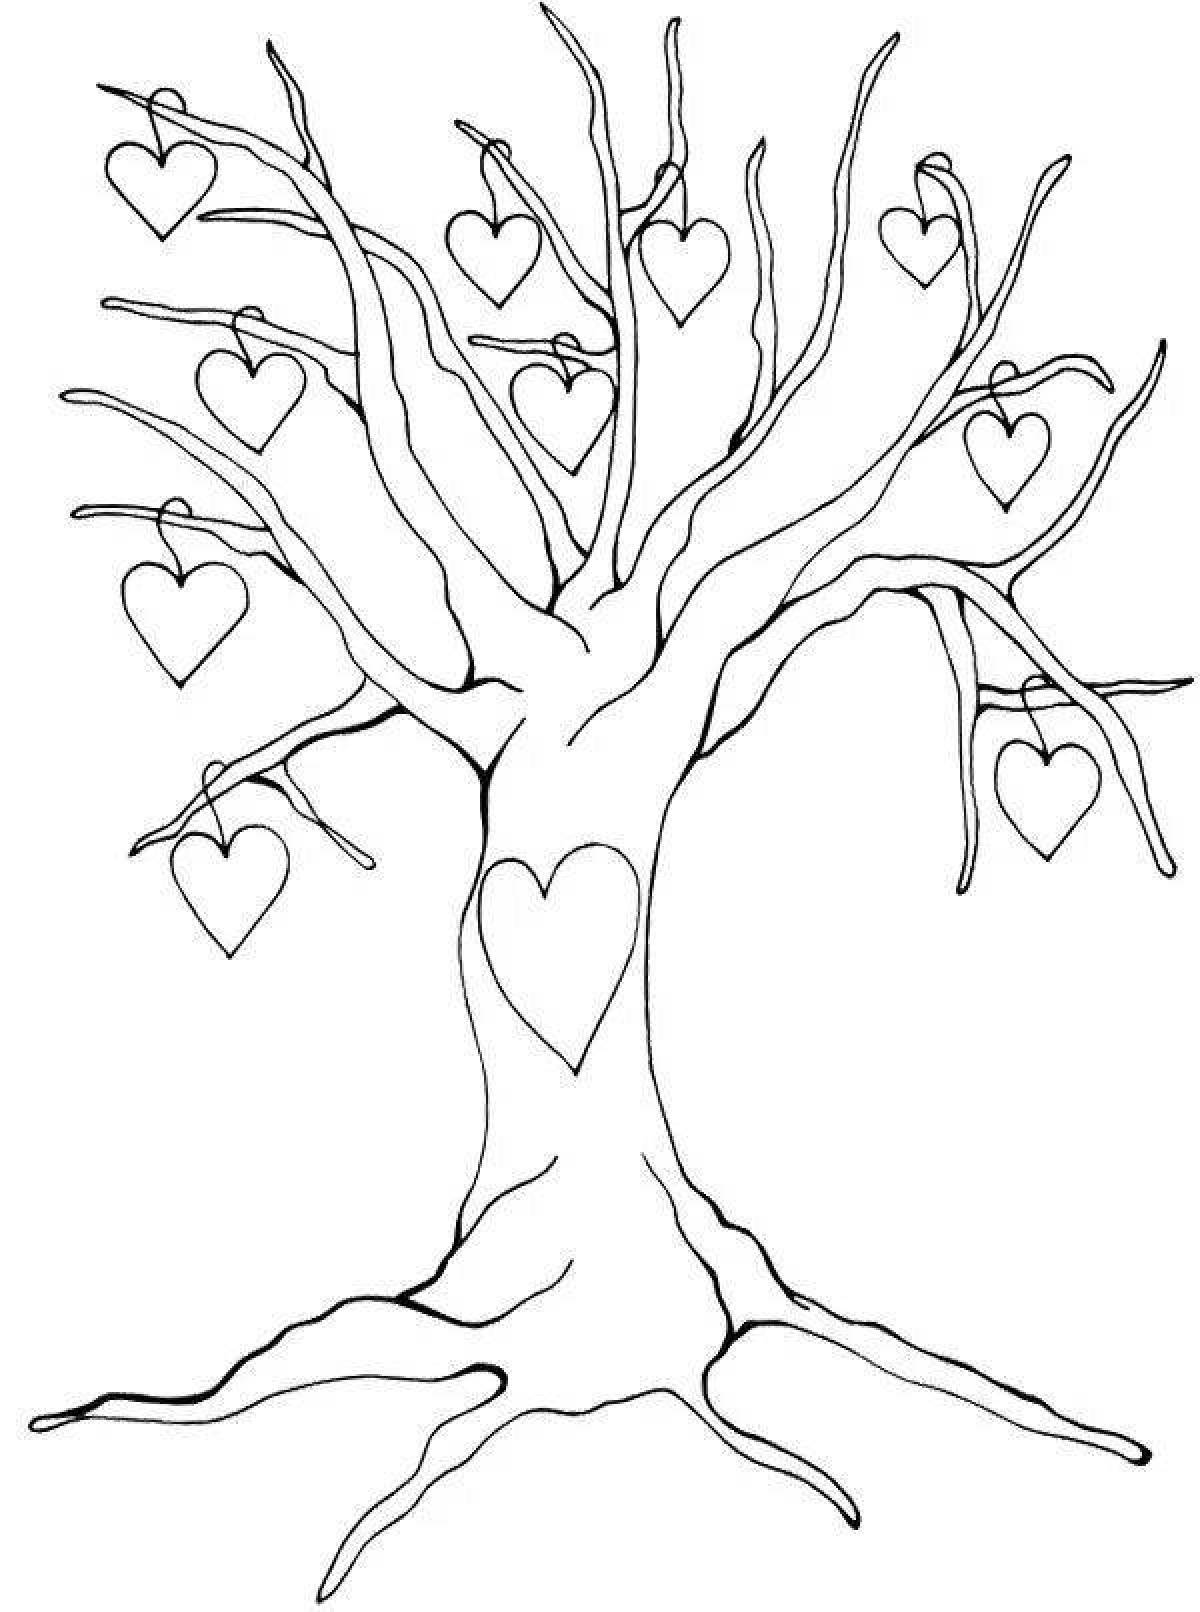 Coloring tree trunk for kids